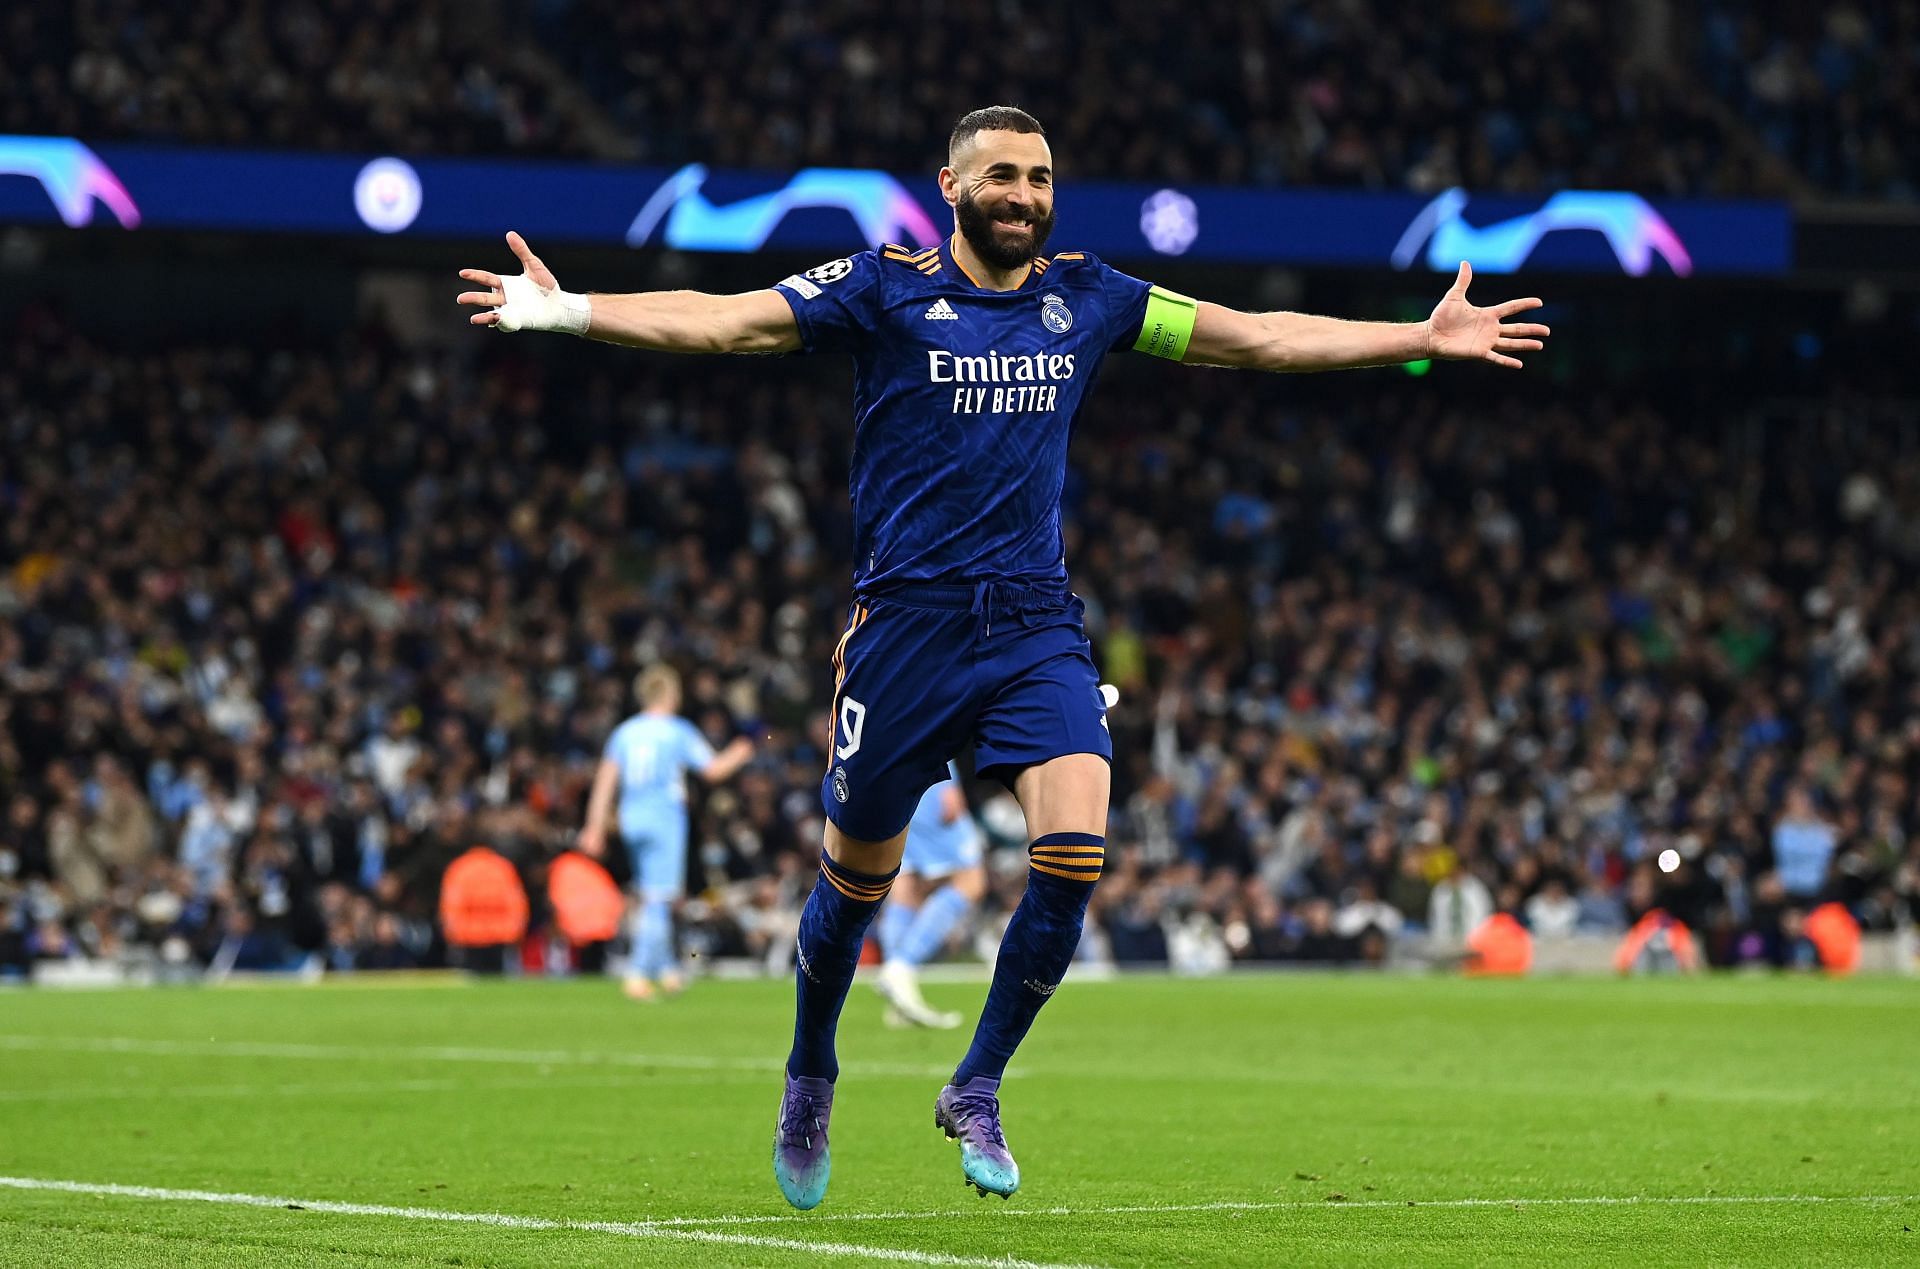 Karim Benzema scored two goals against Manchester City in the first leg of their semifinal tie in the UEFA Champions League (Photo by David Ramos/Getty Images)